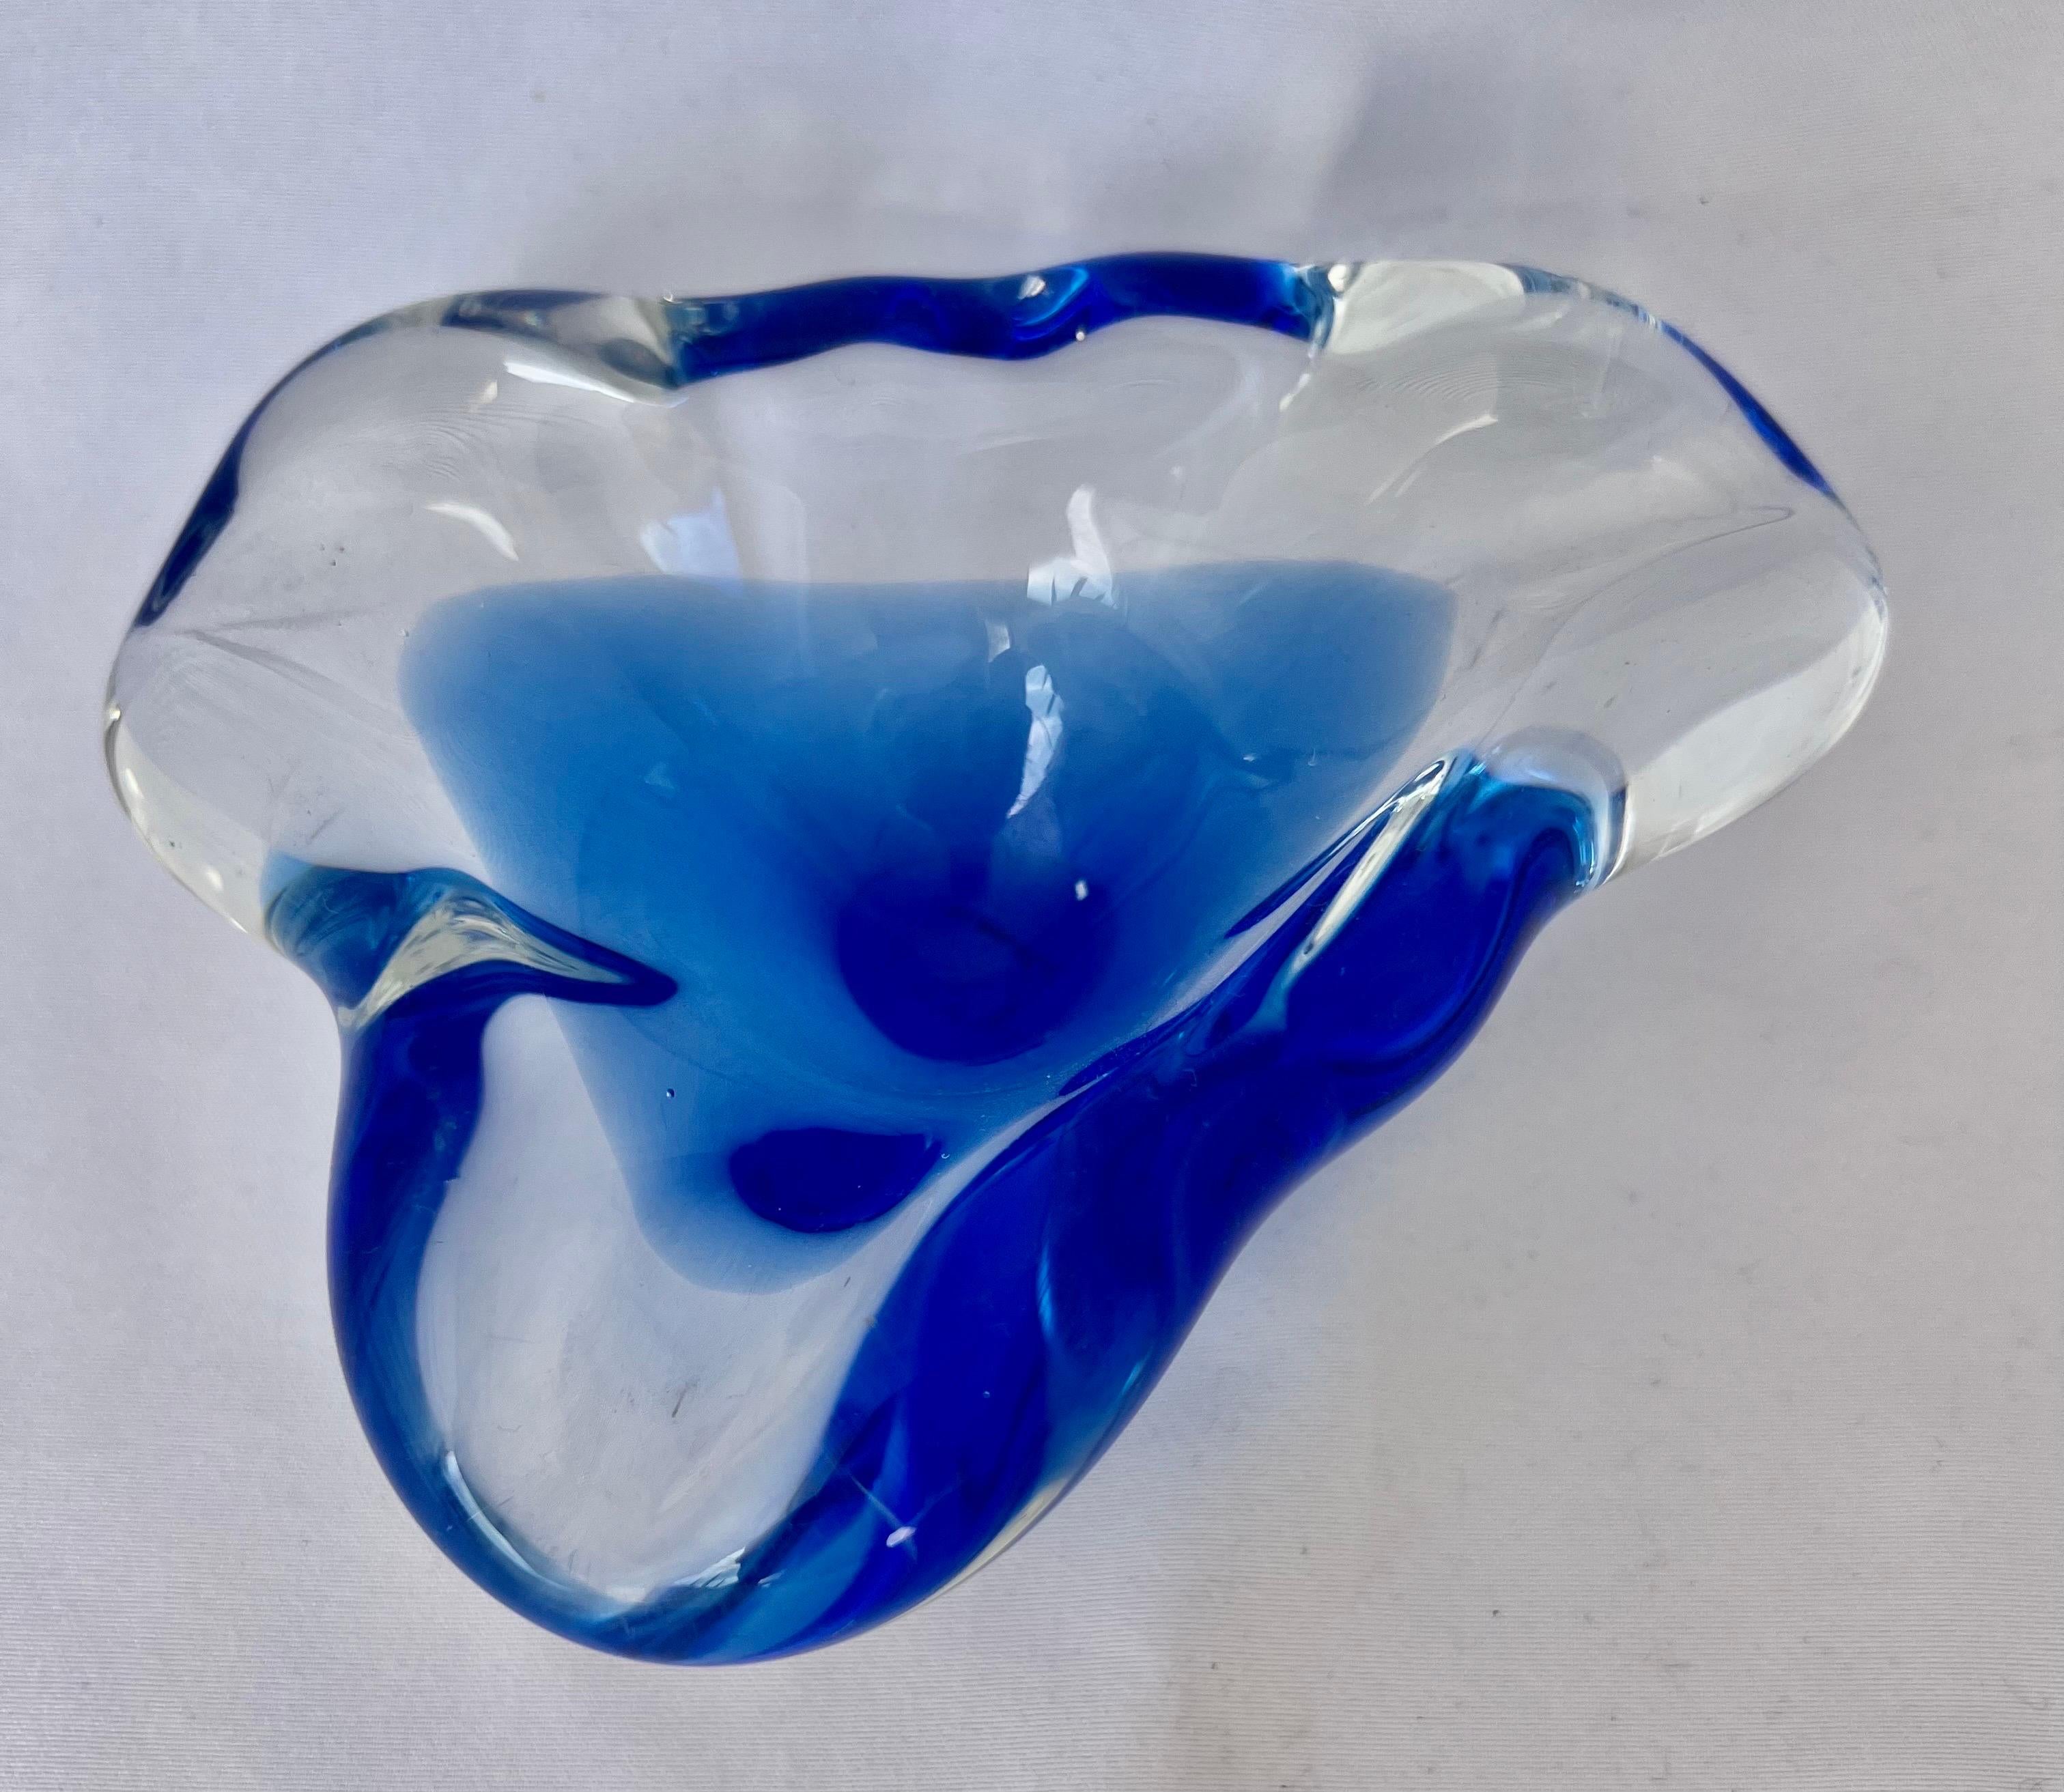 Vintage hand blown blue & clear Murano glass dish. A great accent piece or bookshelf decor.